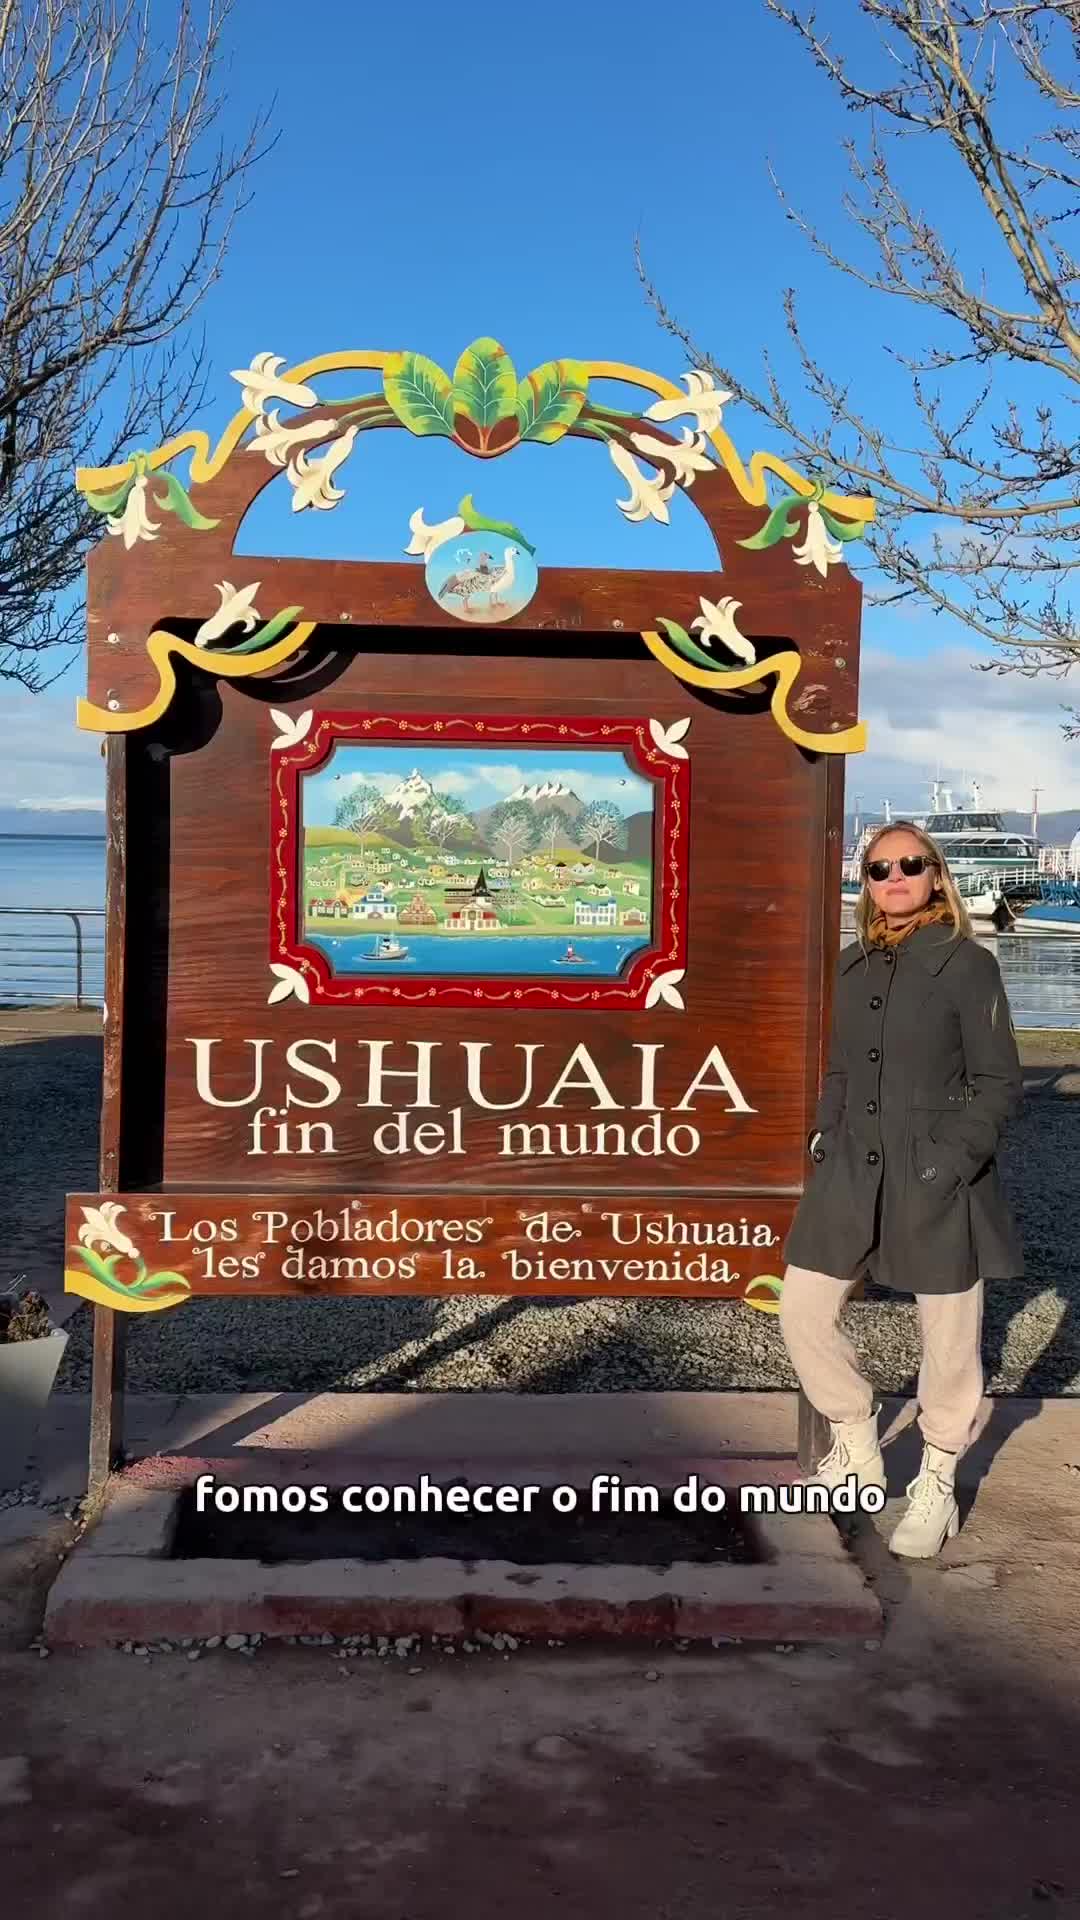 Ushuaia Travel Costs & Tips: Save with Our Discounts